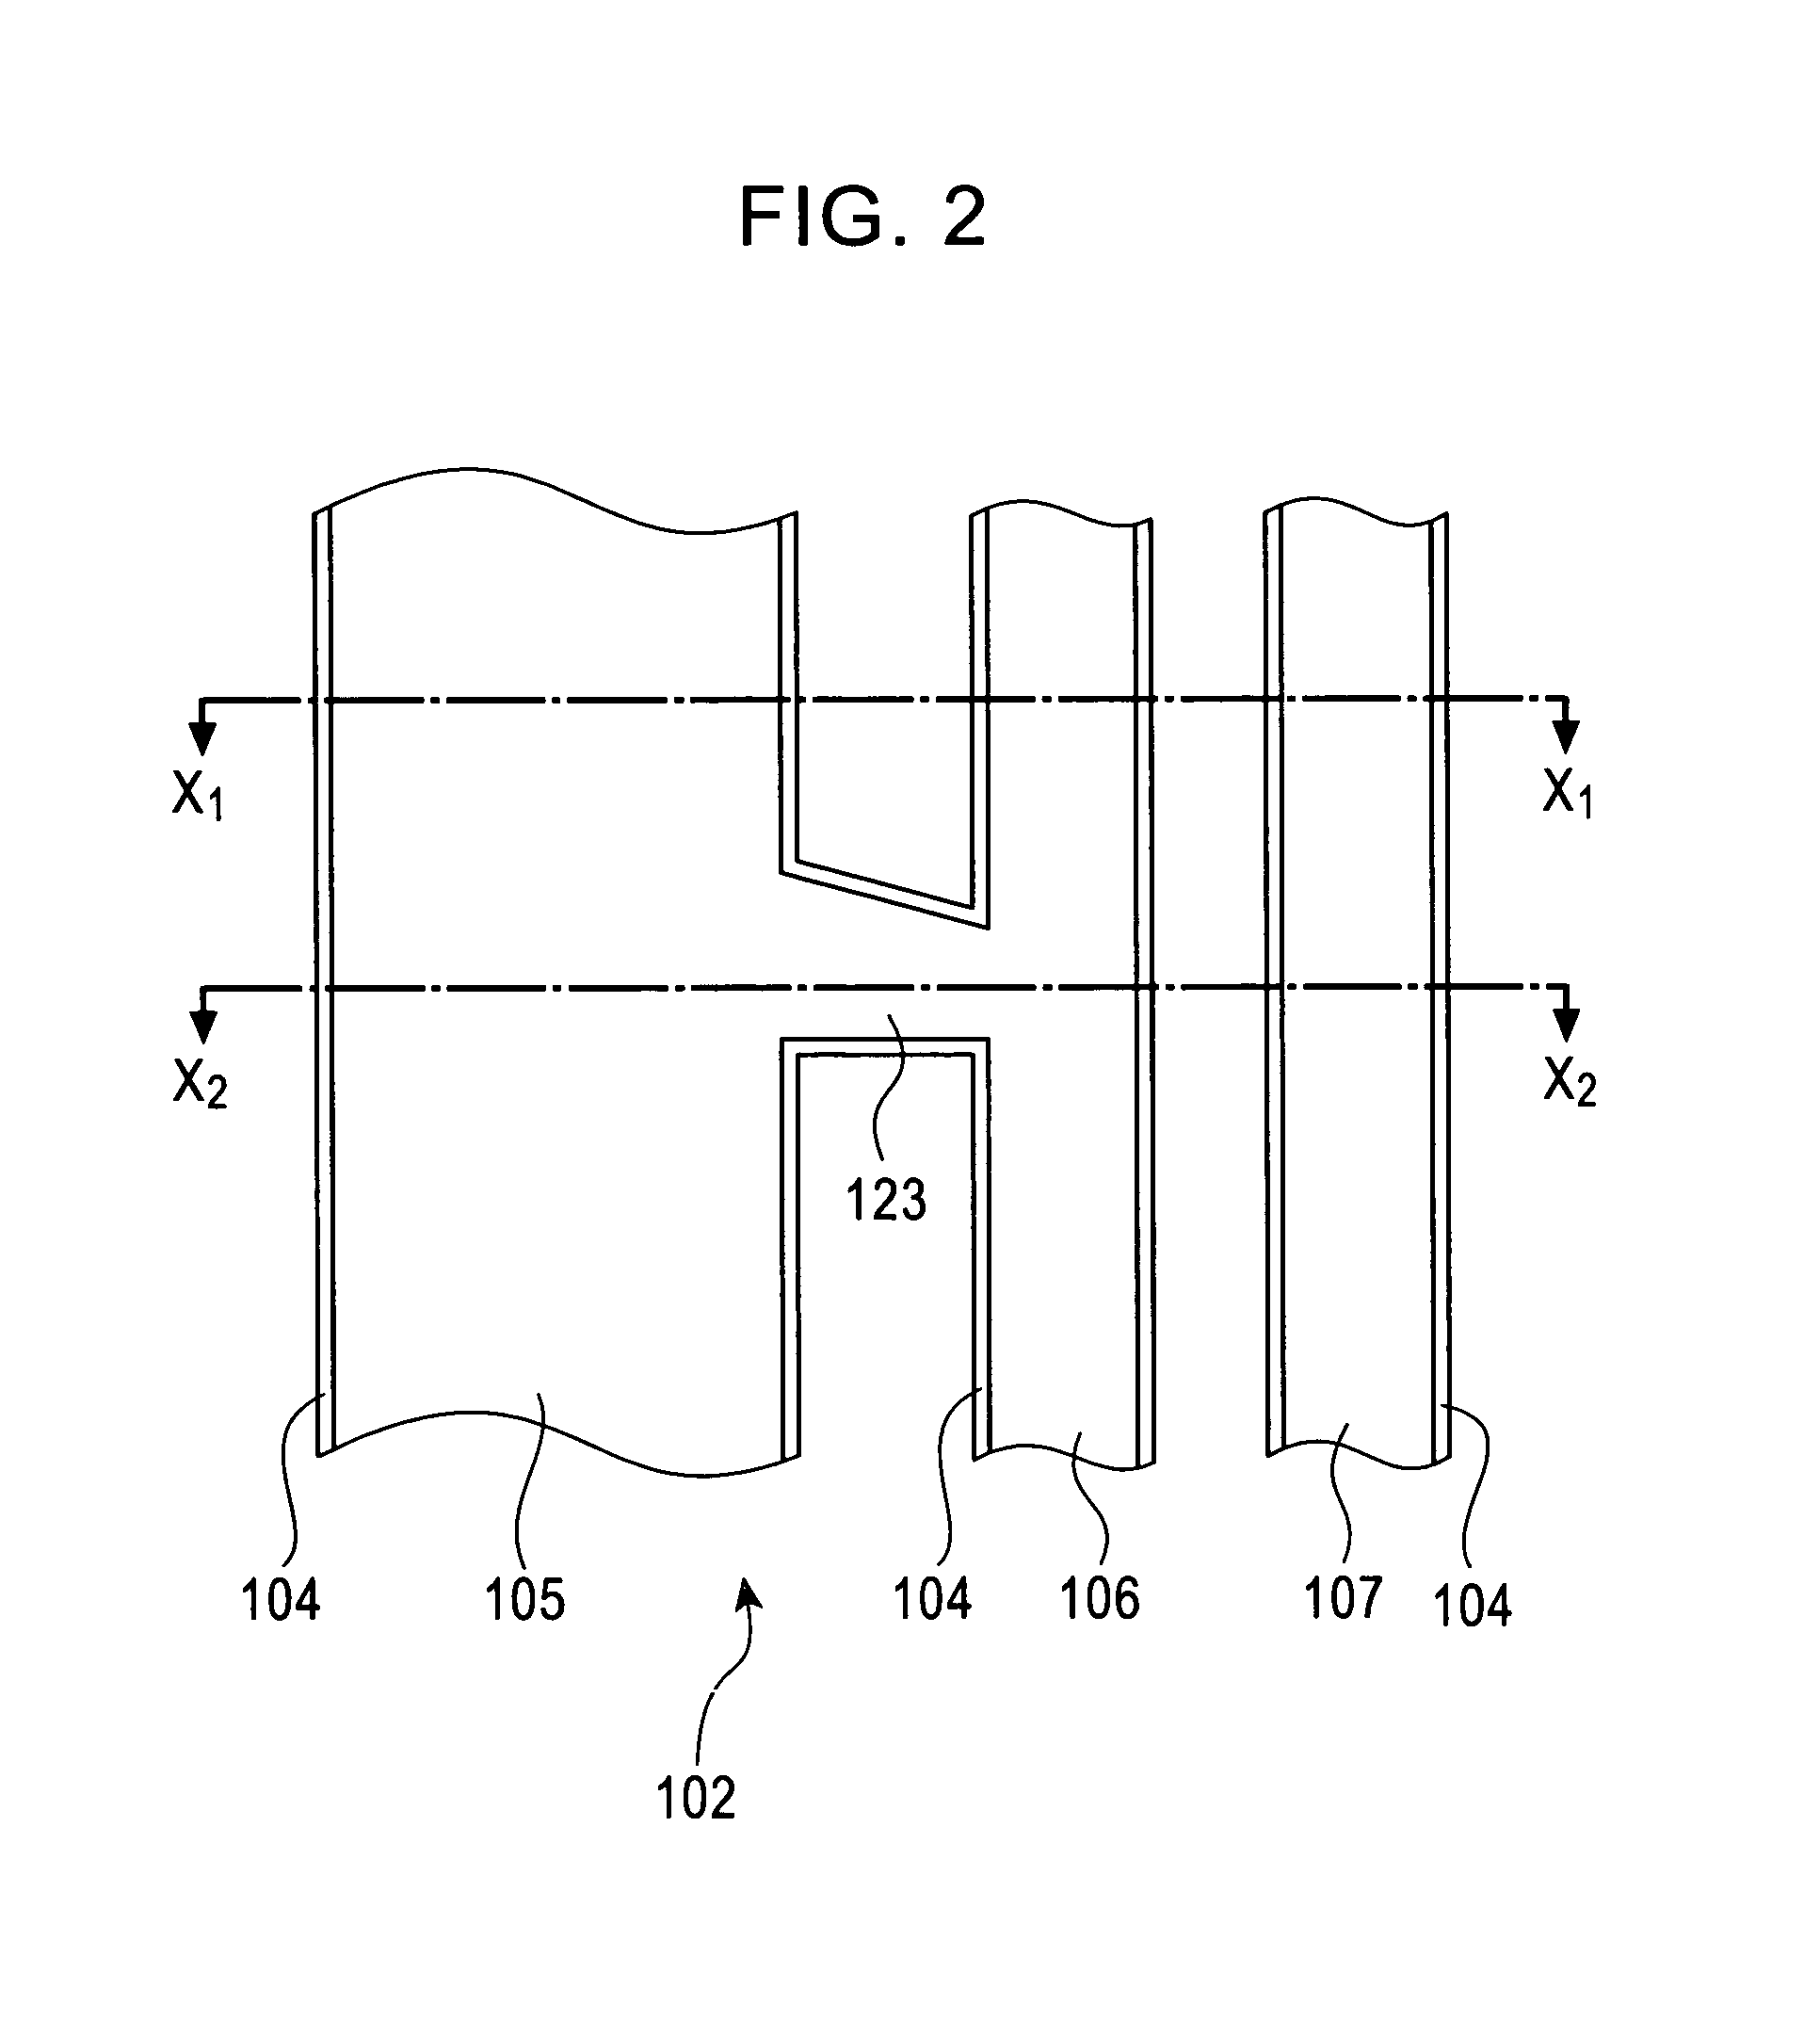 Semiconductor device having isolated pockets of insulation in conductive seal ring